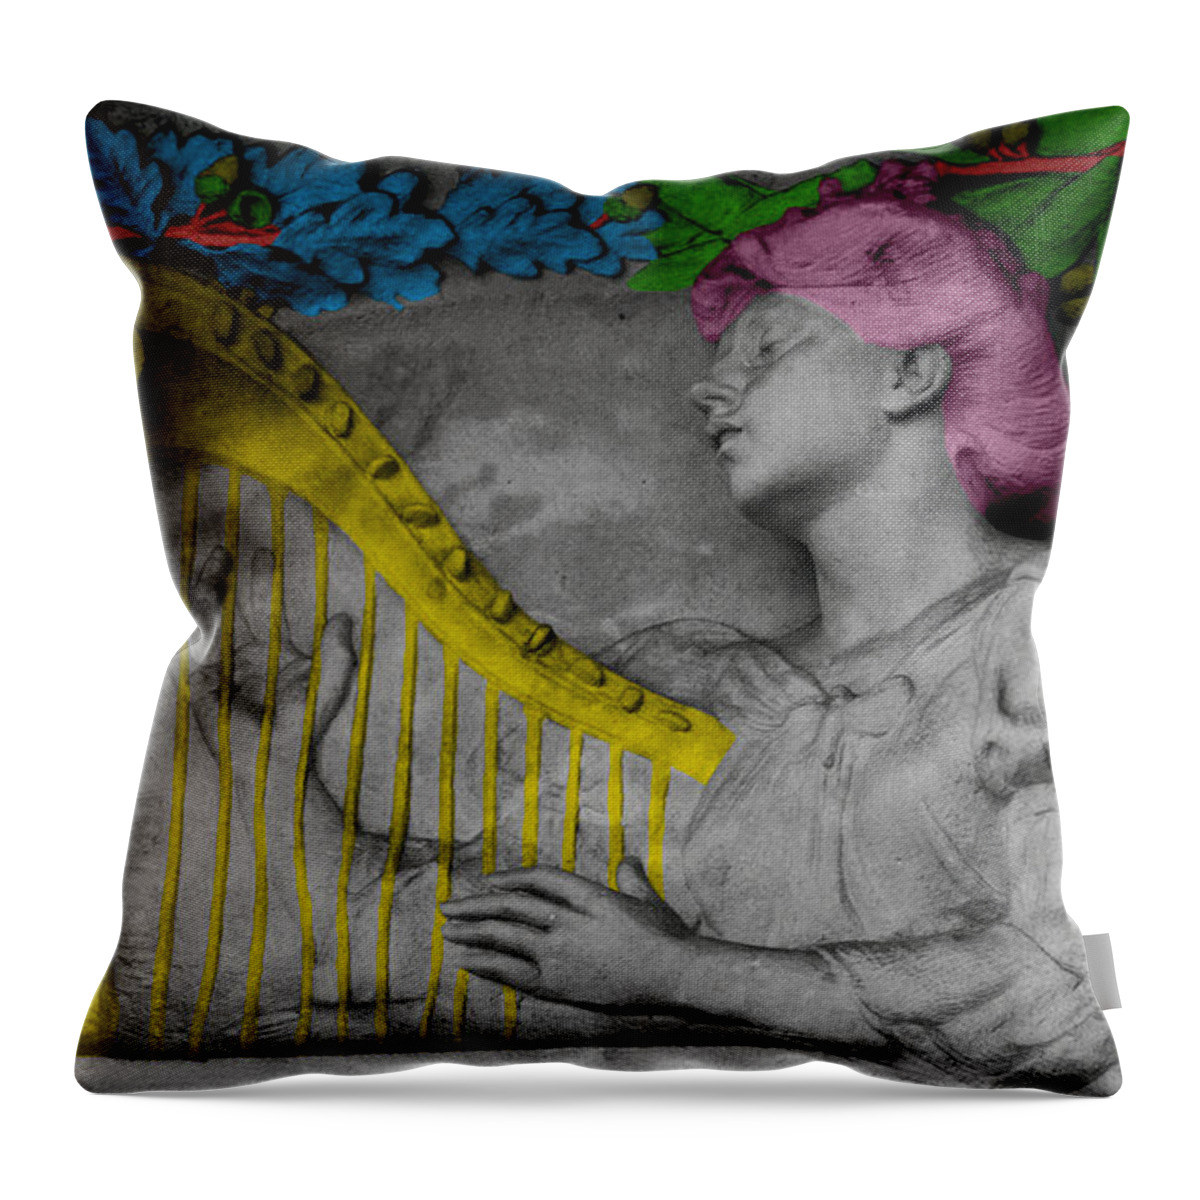 Harp Throw Pillow featuring the photograph The Golden Harp by Emme Pons